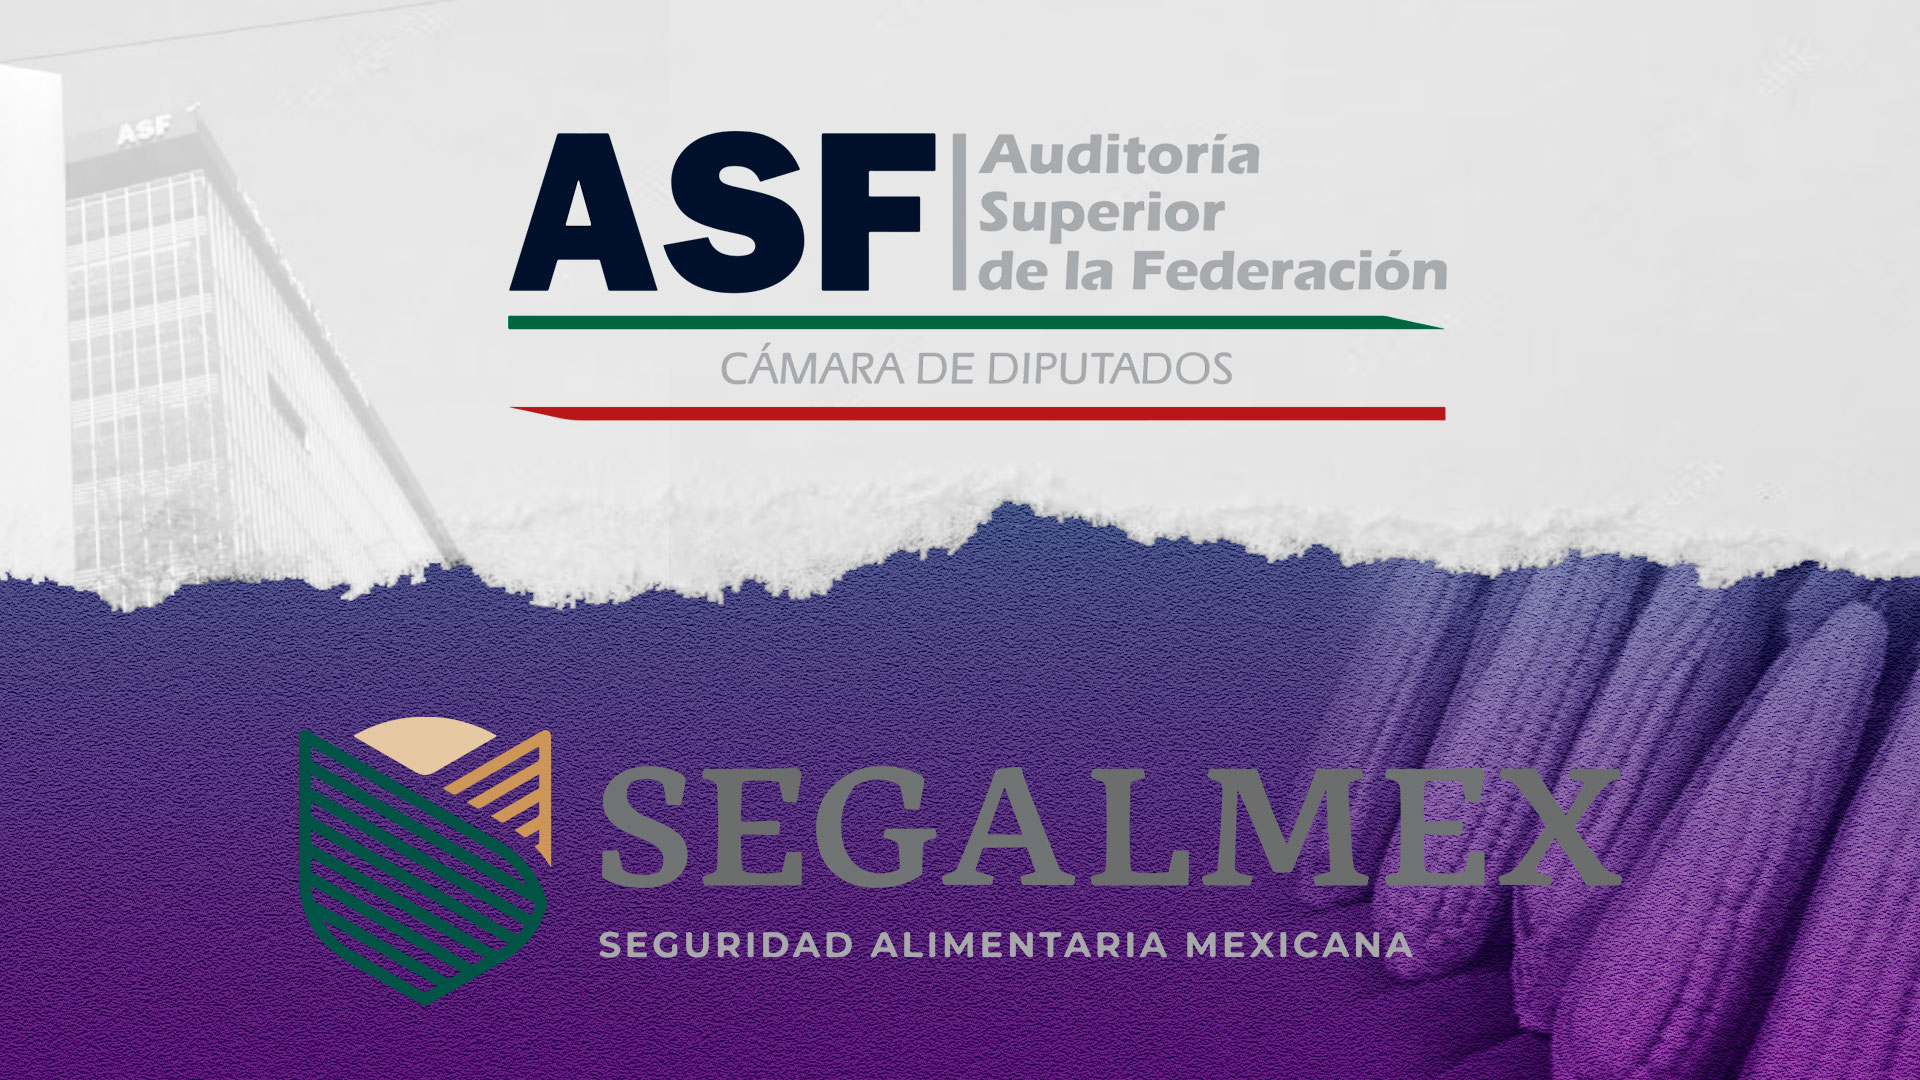 Report of the Superior Audit of the Federation (ASF) questioned the work of Andrés Manuel López Obrador's (AMLO) dependencies (Photo: Infobae México)